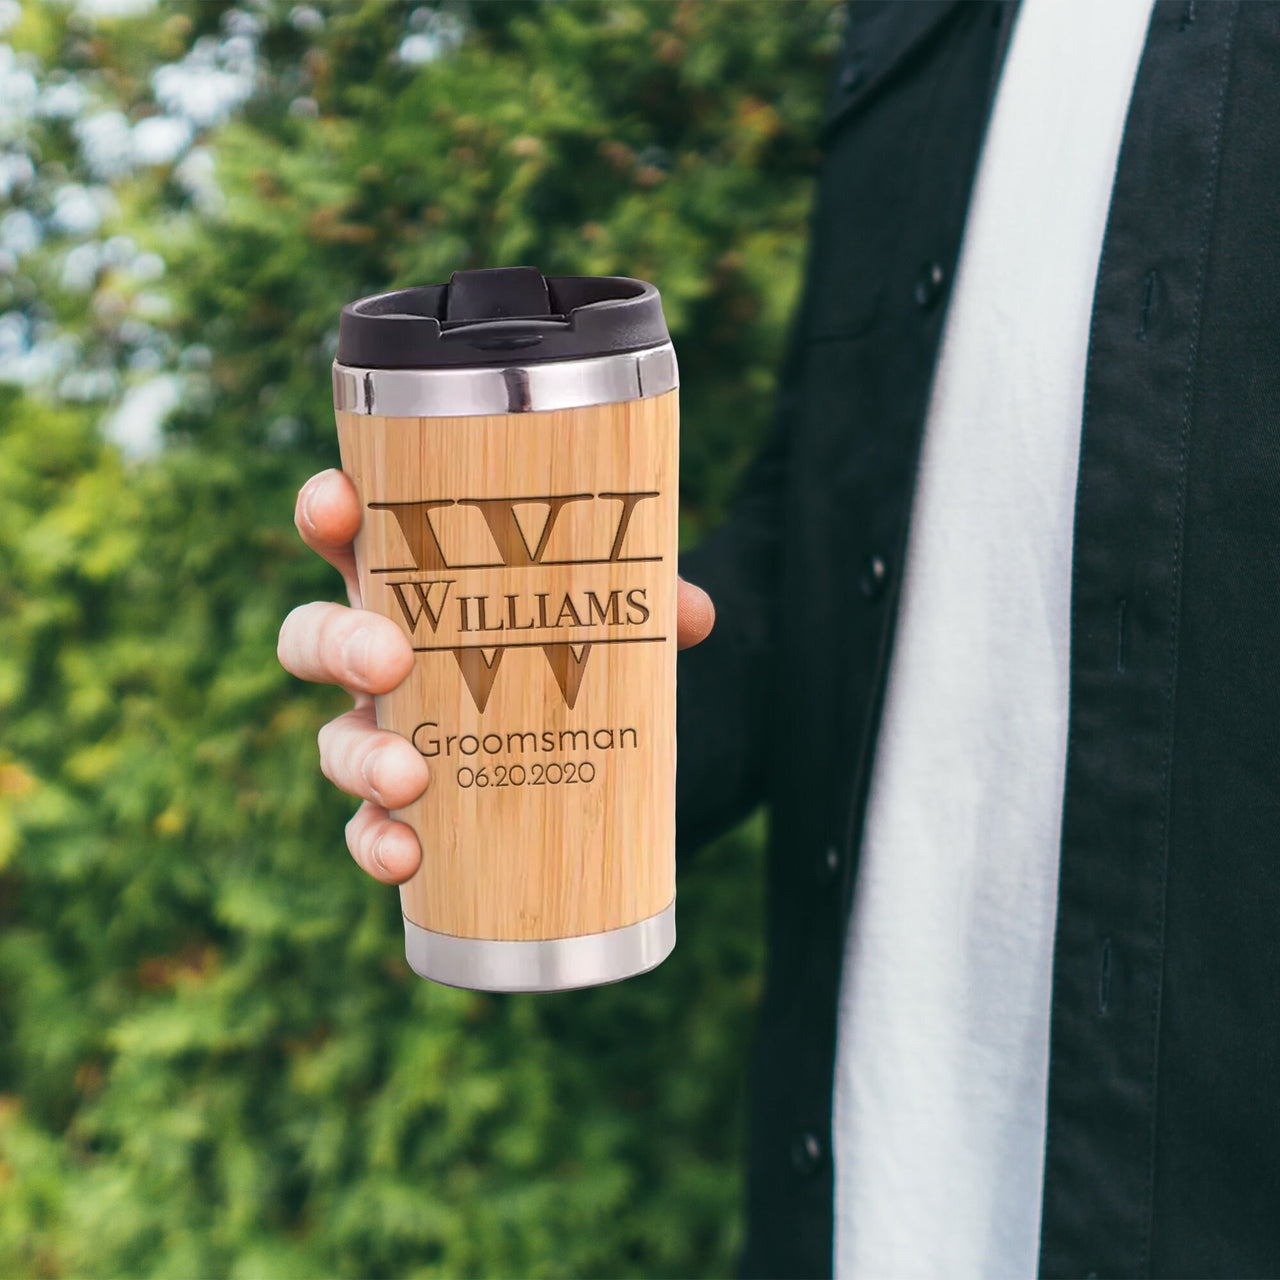 Personalized Groomsmen Proposal Gifts tumblers - Perfect for Your Best Man